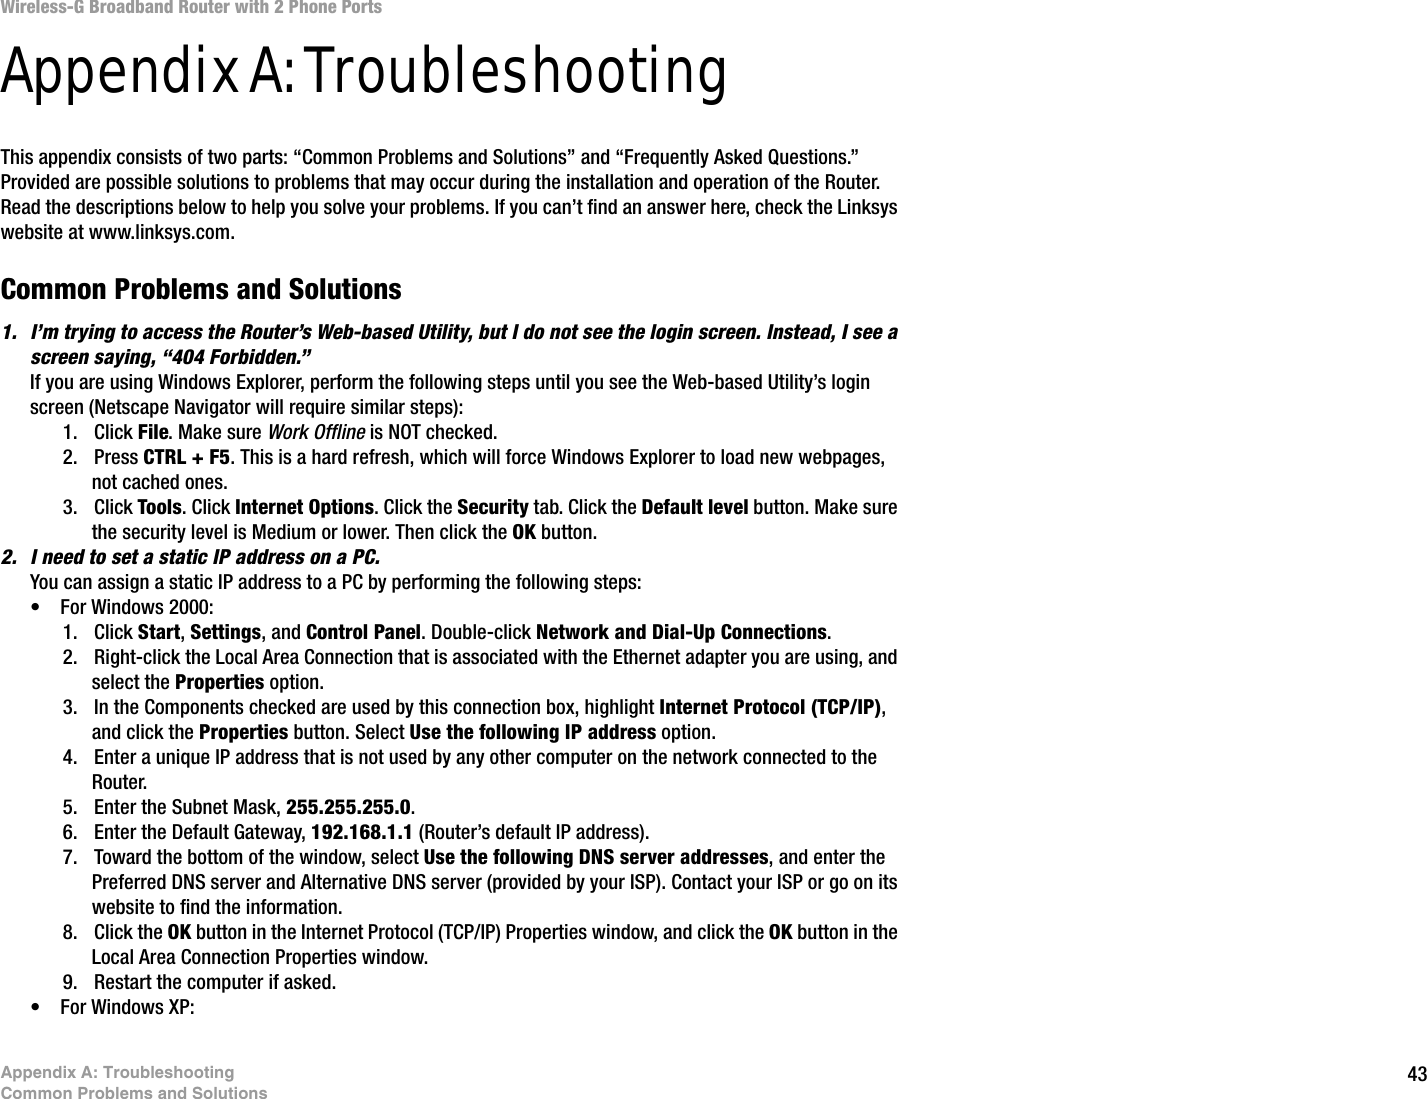 43Appendix A: TroubleshootingCommon Problems and SolutionsWireless-G Broadband Router with 2 Phone PortsAppendix A: TroubleshootingThis appendix consists of two parts: “Common Problems and Solutions” and “Frequently Asked Questions.” Provided are possible solutions to problems that may occur during the installation and operation of the Router. Read the descriptions below to help you solve your problems. If you can’t find an answer here, check the Linksys website at www.linksys.com.Common Problems and Solutions1. I’m trying to access the Router’s Web-based Utility, but I do not see the login screen. Instead, I see a screen saying, “404 Forbidden.”If you are using Windows Explorer, perform the following steps until you see the Web-based Utility’s login screen (Netscape Navigator will require similar steps):1. Click File. Make sure Work Offline is NOT checked.2. Press CTRL + F5. This is a hard refresh, which will force Windows Explorer to load new webpages, not cached ones.3. Click Tools. Click Internet Options. Click the Security tab. Click the Default level button. Make sure the security level is Medium or lower. Then click the OK button.2. I need to set a static IP address on a PC.You can assign a static IP address to a PC by performing the following steps:• For Windows 2000:1. Click Start, Settings, and Control Panel. Double-click Network and Dial-Up Connections.2. Right-click the Local Area Connection that is associated with the Ethernet adapter you are using, and select the Properties option.3. In the Components checked are used by this connection box, highlight Internet Protocol (TCP/IP), and click the Properties button. Select Use the following IP address option.4. Enter a unique IP address that is not used by any other computer on the network connected to the Router. 5. Enter the Subnet Mask, 255.255.255.0.6. Enter the Default Gateway, 192.168.1.1 (Router’s default IP address).7. Toward the bottom of the window, select Use the following DNS server addresses, and enter the Preferred DNS server and Alternative DNS server (provided by your ISP). Contact your ISP or go on its website to find the information.8. Click the OK button in the Internet Protocol (TCP/IP) Properties window, and click the OK button in the Local Area Connection Properties window.9. Restart the computer if asked.• For Windows XP: